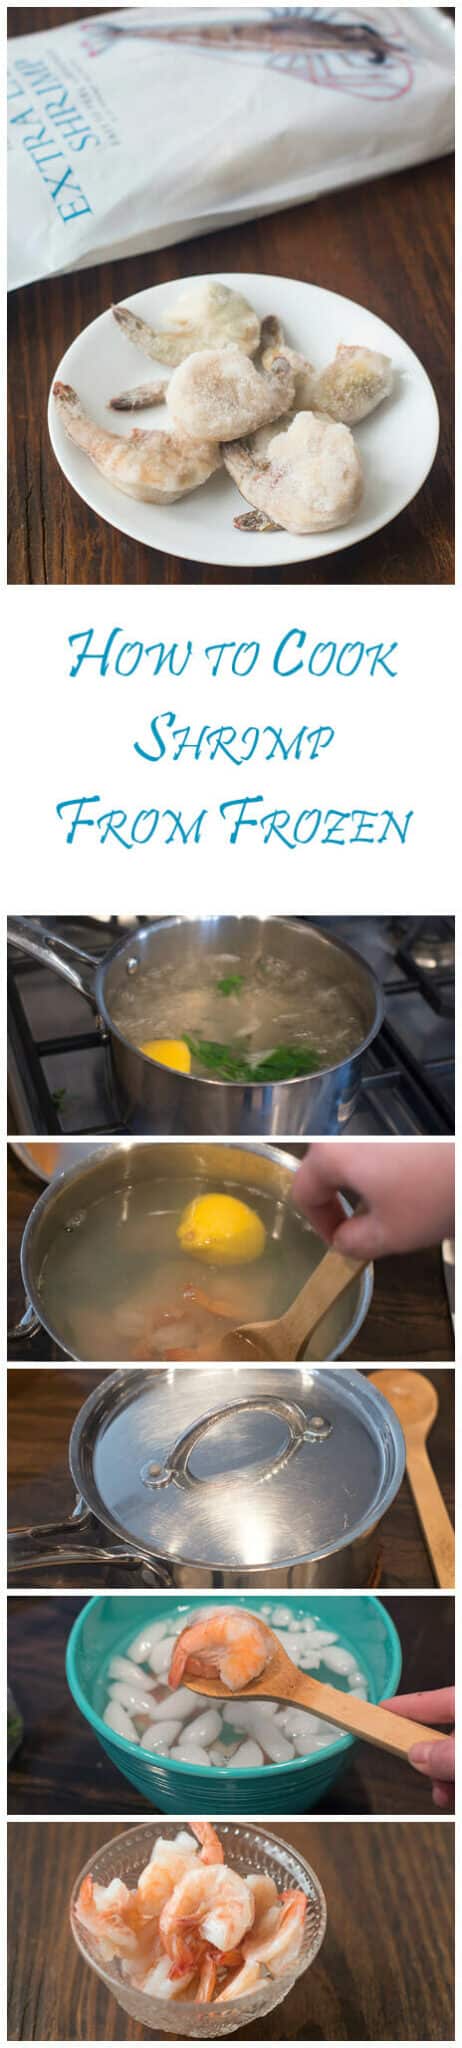 How to Cook Shrimp from Frozen